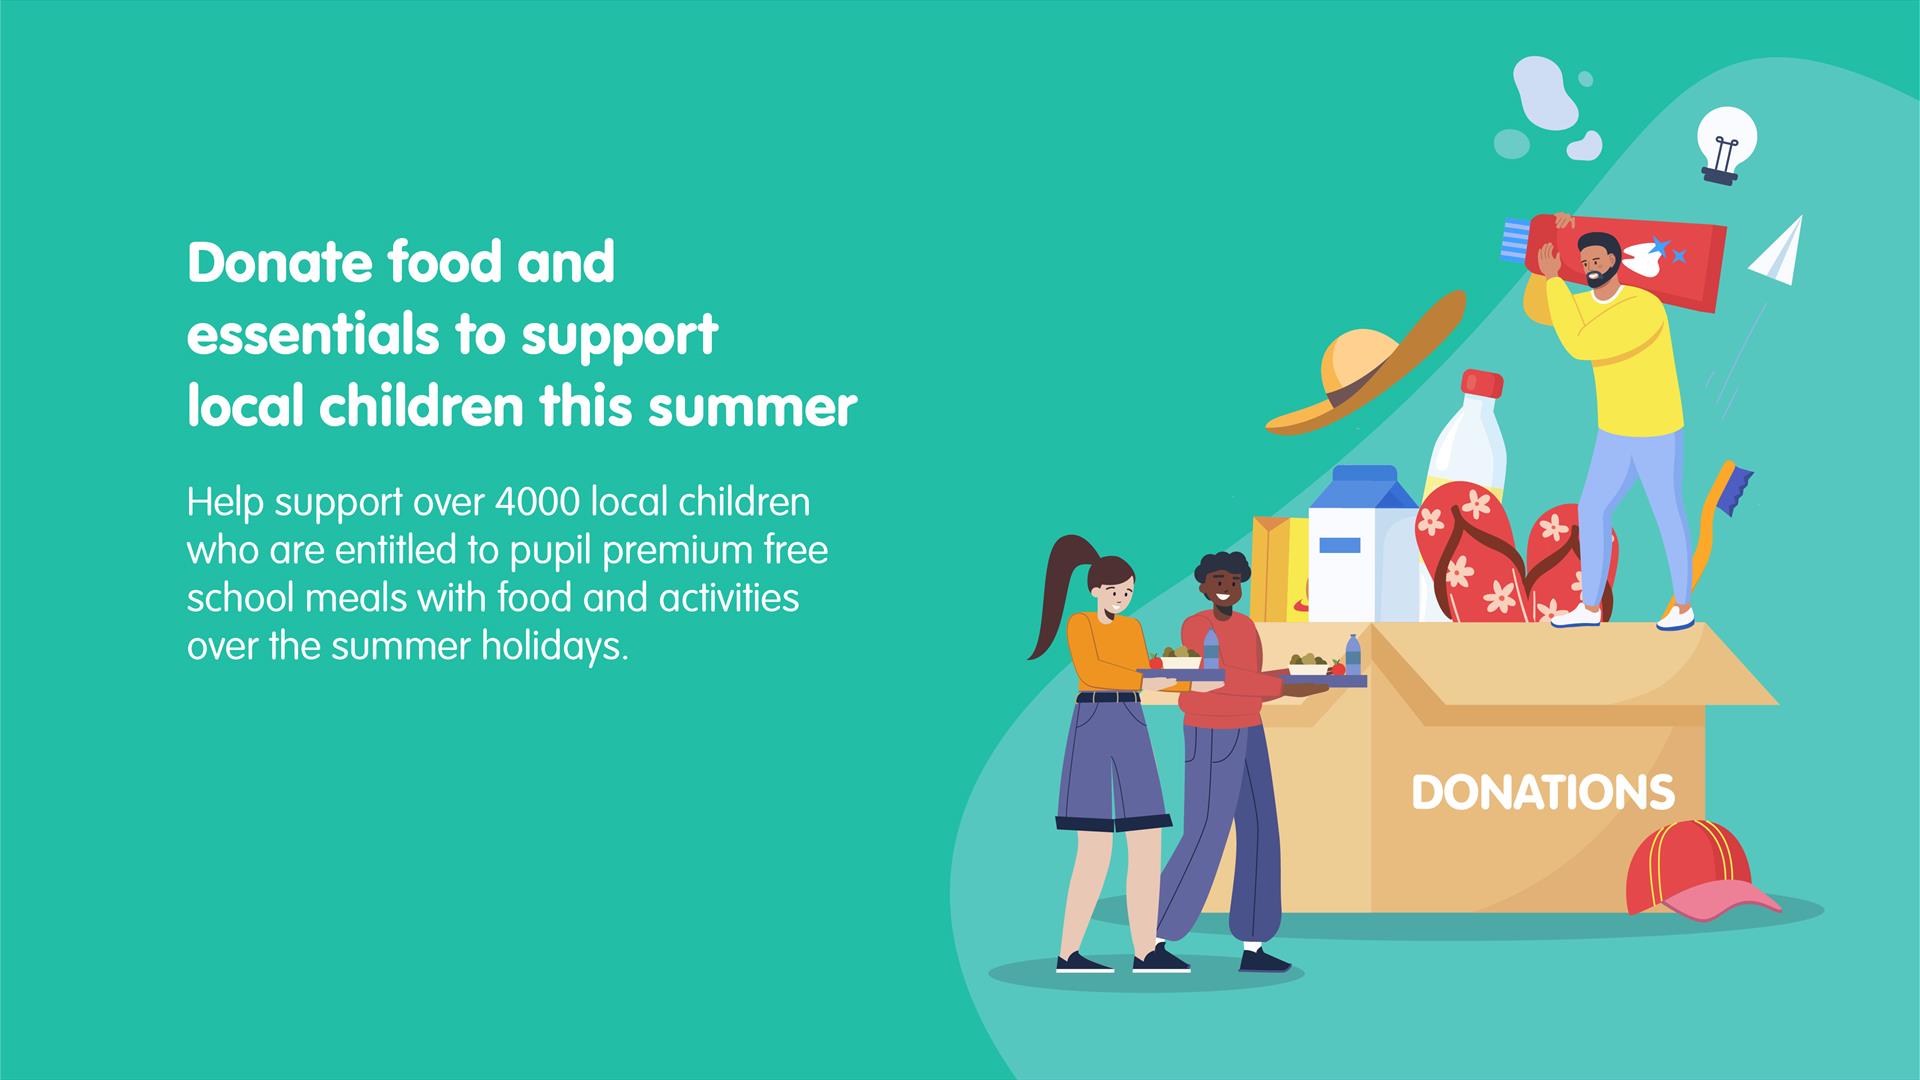 Graphic illustration of a food donation box with food items and two children with trays of lunch food